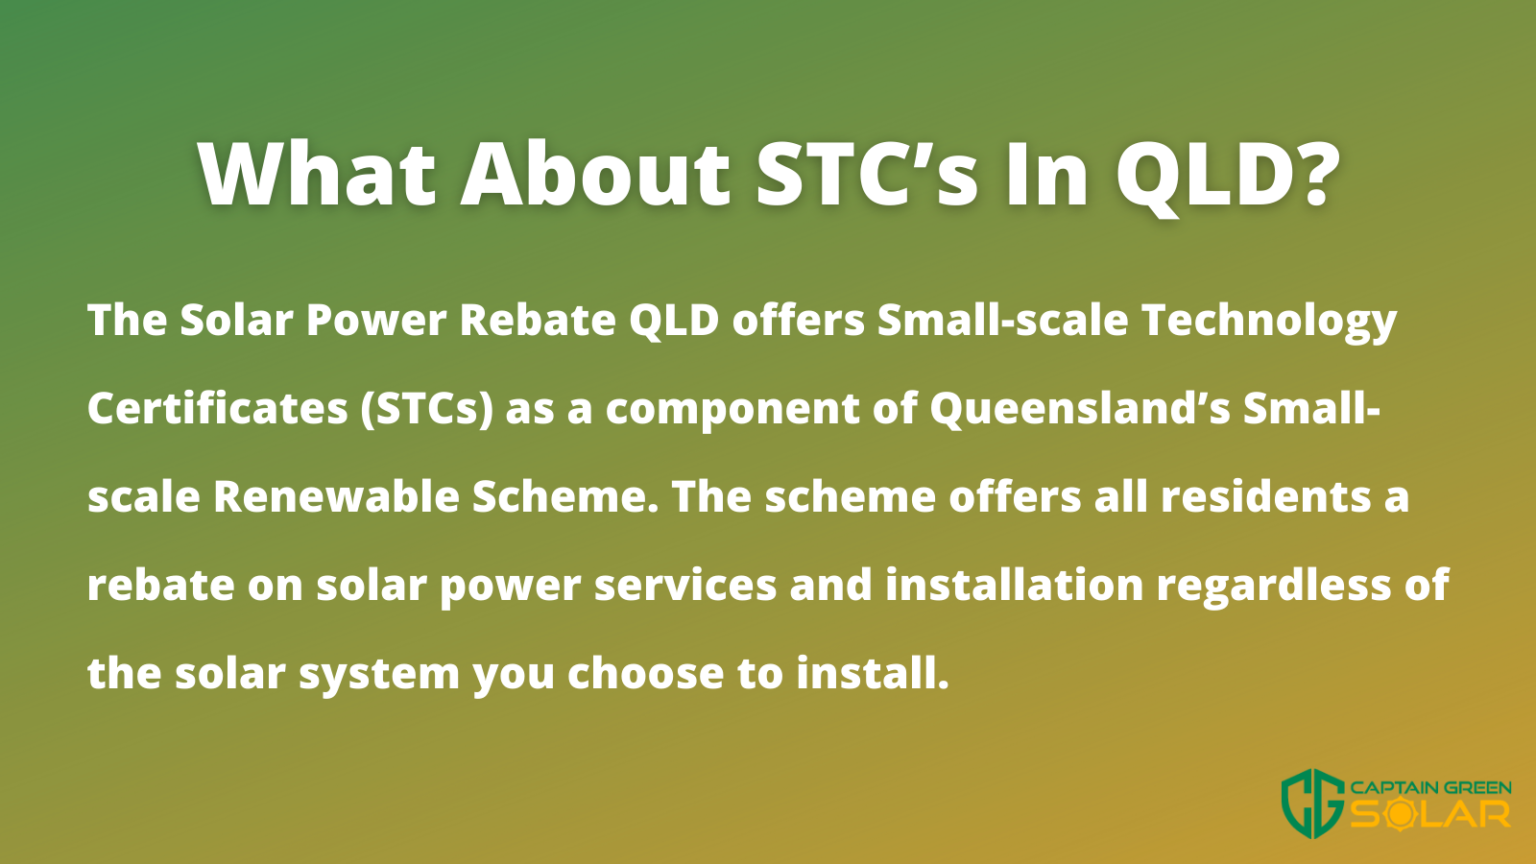 solar-rebate-qld-2021-your-guide-captain-green-solar